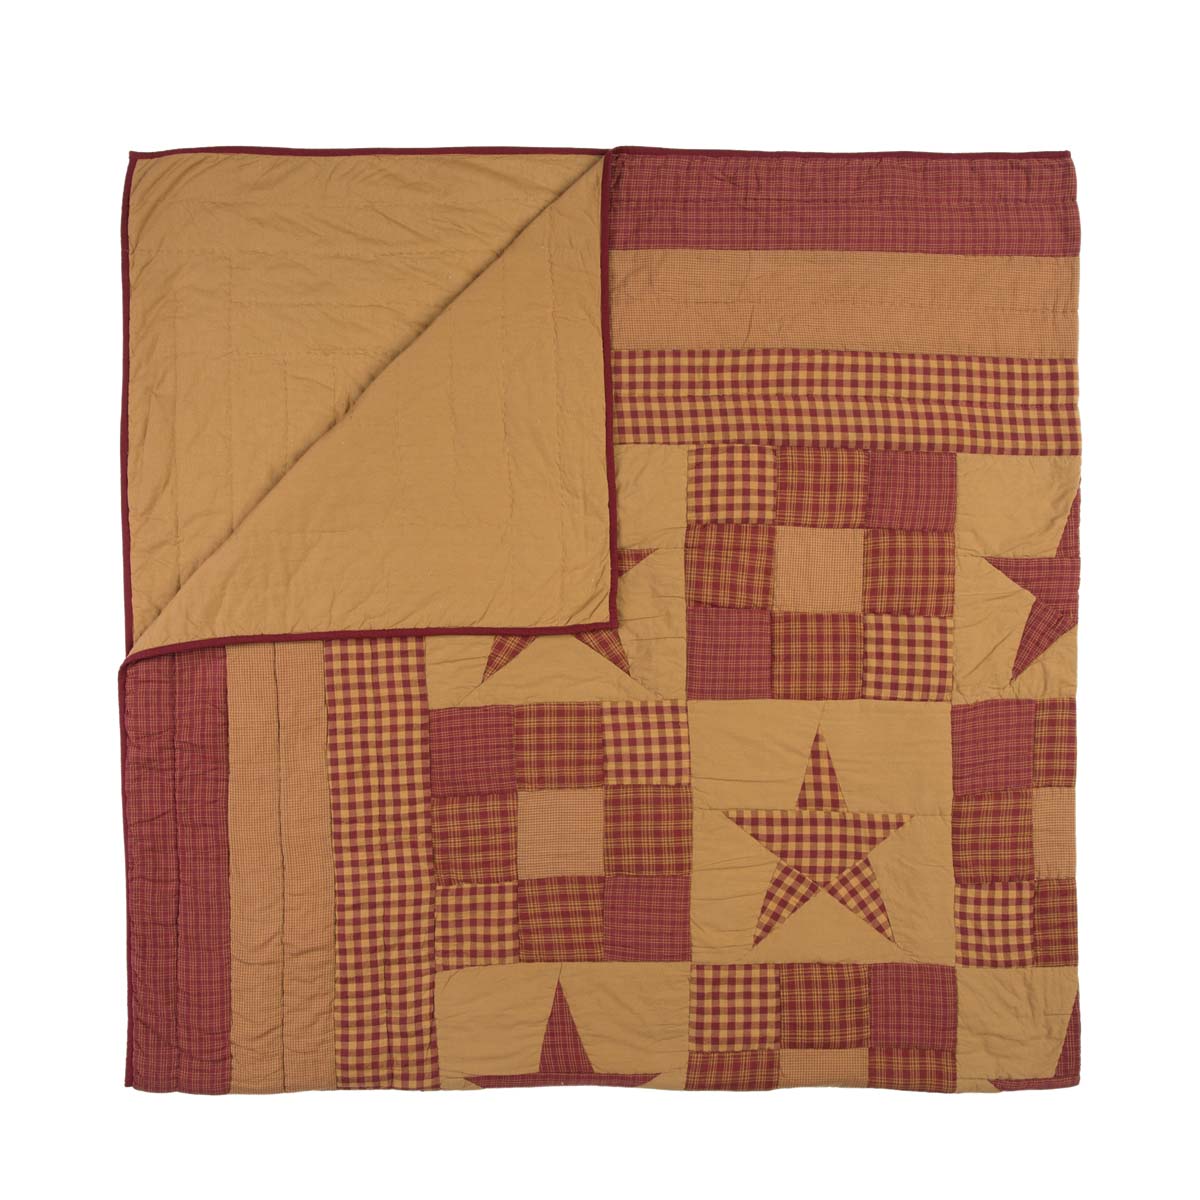 Ninepatch Star Luxury King Quilt 120Wx105L